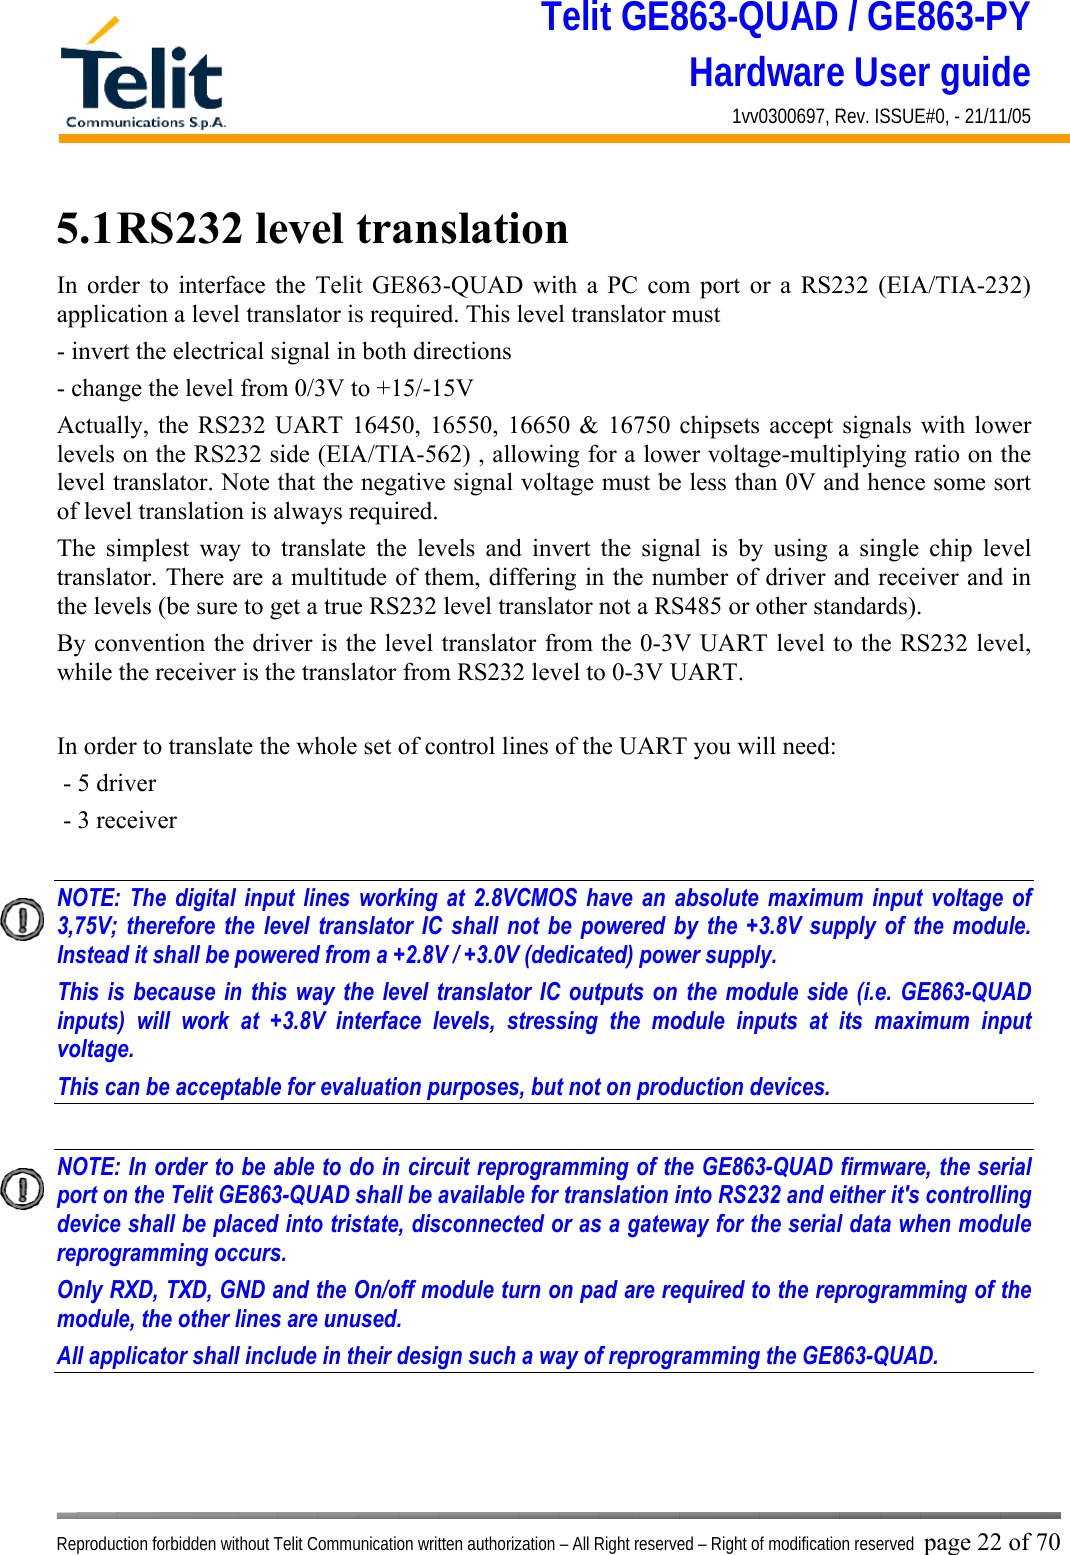 Telit GE863-QUAD / GE863-PY Hardware User guide 1vv0300697, Rev. ISSUE#0, - 21/11/05    Reproduction forbidden without Telit Communication written authorization – All Right reserved – Right of modification reserved page 22 of 70 5.1 RS232 level translation In order to interface the Telit GE863-QUAD with a PC com port or a RS232 (EIA/TIA-232) application a level translator is required. This level translator must - invert the electrical signal in both directions - change the level from 0/3V to +15/-15V  Actually, the RS232 UART 16450, 16550, 16650 &amp; 16750 chipsets accept signals with lower levels on the RS232 side (EIA/TIA-562) , allowing for a lower voltage-multiplying ratio on the level translator. Note that the negative signal voltage must be less than 0V and hence some sort of level translation is always required.  The simplest way to translate the levels and invert the signal is by using a single chip level translator. There are a multitude of them, differing in the number of driver and receiver and in the levels (be sure to get a true RS232 level translator not a RS485 or other standards). By convention the driver is the level translator from the 0-3V UART level to the RS232 level, while the receiver is the translator from RS232 level to 0-3V UART.  In order to translate the whole set of control lines of the UART you will need:  - 5 driver - 3 receiver  NOTE: The digital input lines working at 2.8VCMOS have an absolute maximum input voltage of 3,75V; therefore the level translator IC shall not be powered by the +3.8V supply of the module. Instead it shall be powered from a +2.8V / +3.0V (dedicated) power supply. This is because in this way the level translator IC outputs on the module side (i.e. GE863-QUAD inputs) will work at +3.8V interface levels, stressing the module inputs at its maximum input voltage. This can be acceptable for evaluation purposes, but not on production devices.  NOTE: In order to be able to do in circuit reprogramming of the GE863-QUAD firmware, the serial port on the Telit GE863-QUAD shall be available for translation into RS232 and either it&apos;s controlling device shall be placed into tristate, disconnected or as a gateway for the serial data when module reprogramming occurs. Only RXD, TXD, GND and the On/off module turn on pad are required to the reprogramming of the module, the other lines are unused. All applicator shall include in their design such a way of reprogramming the GE863-QUAD.    